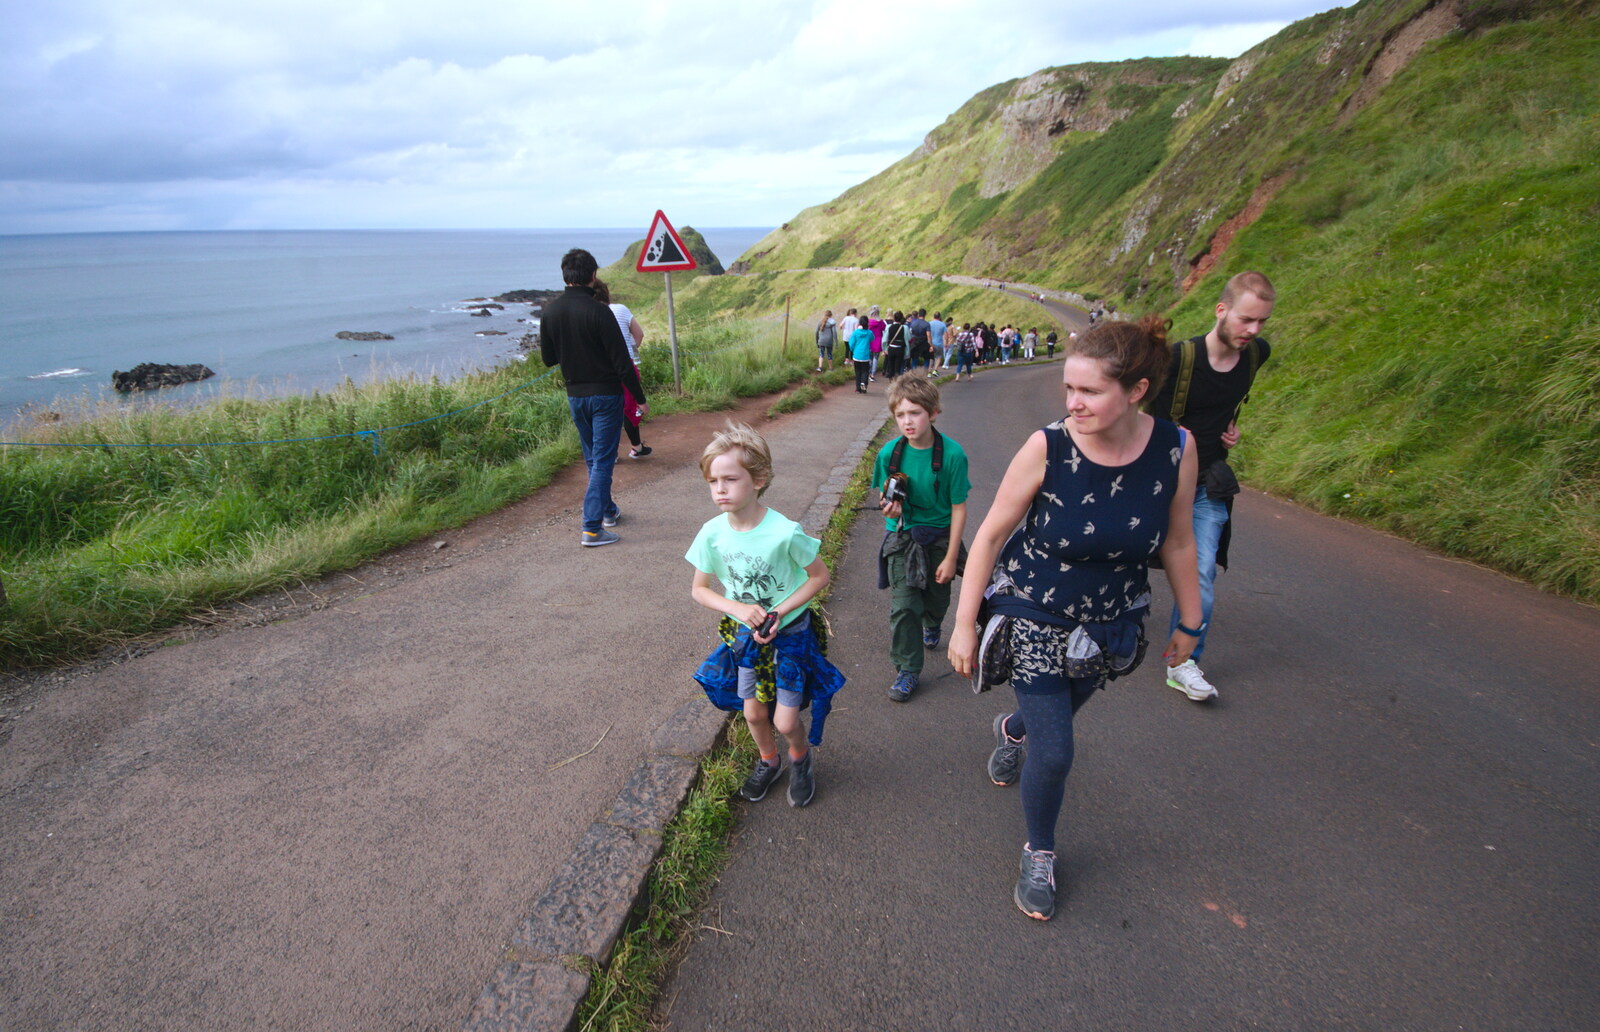 We climb back up the long hill from The Giant's Causeway, Bushmills, County Antrim, Northern Ireland - 14th August 2019